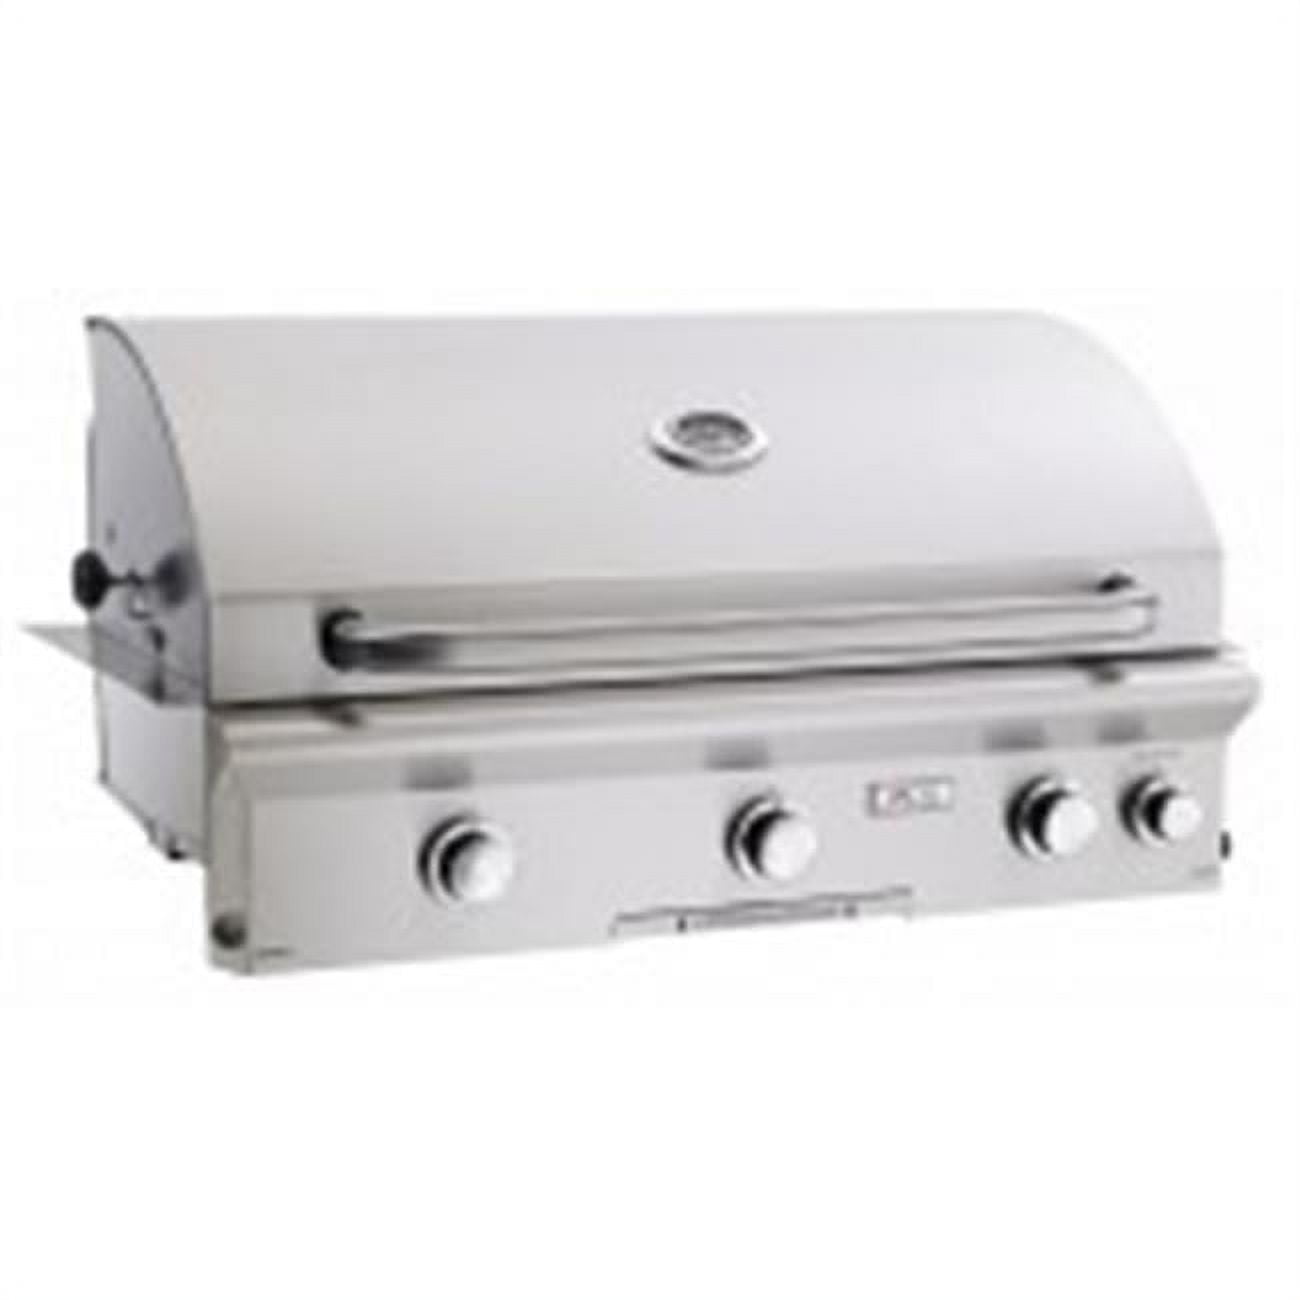 36nbl 36 In. L-series Built In Natural Gas Grill Rotisserie Kit